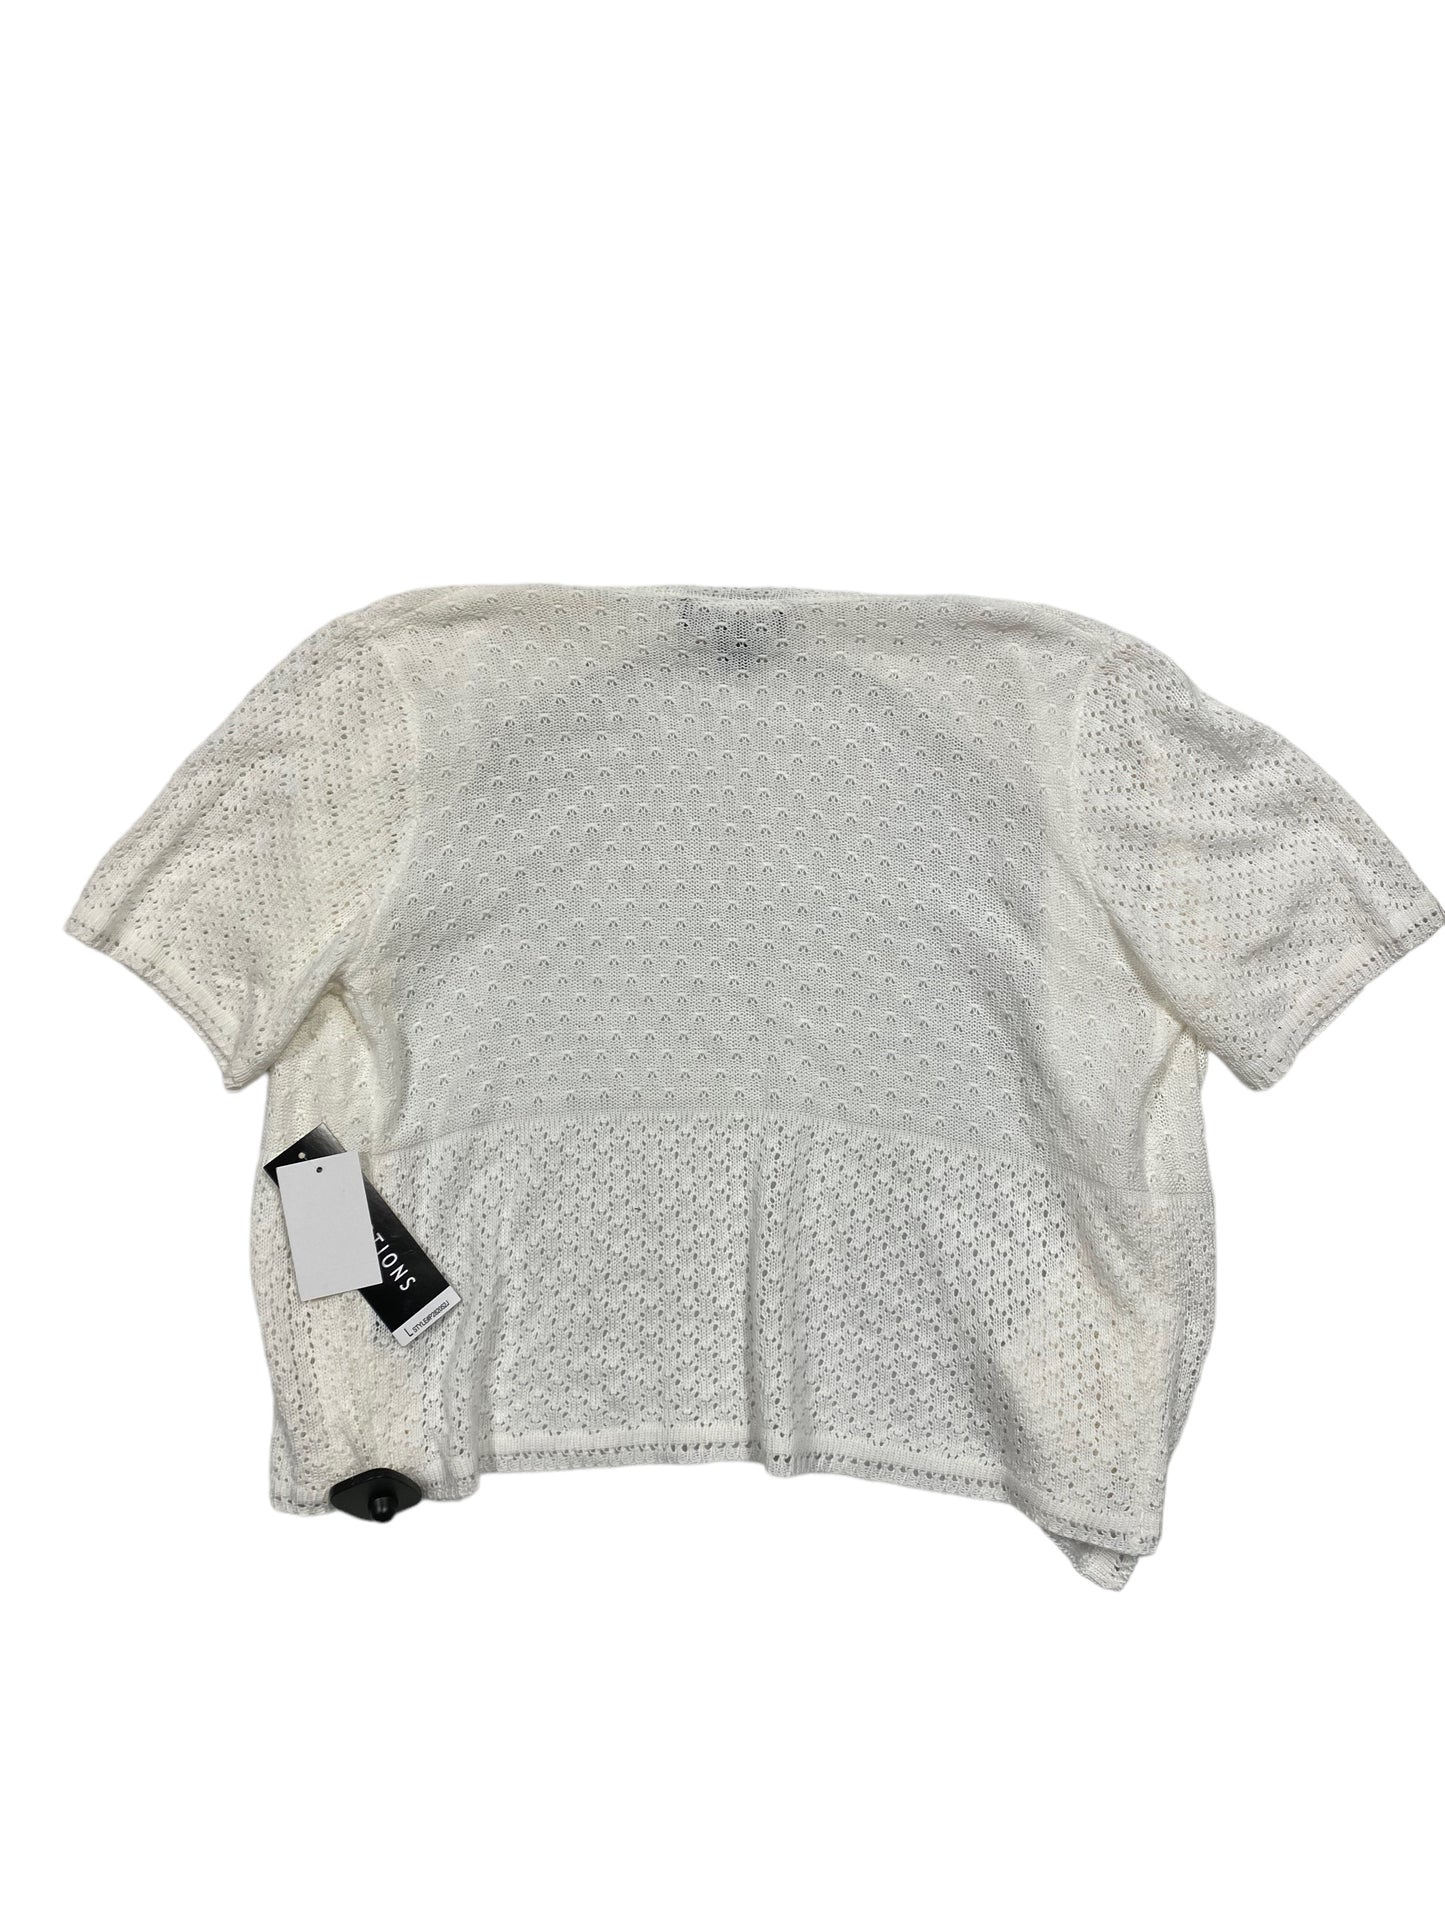 White Sweater Short Sleeve Perceptions, Size L